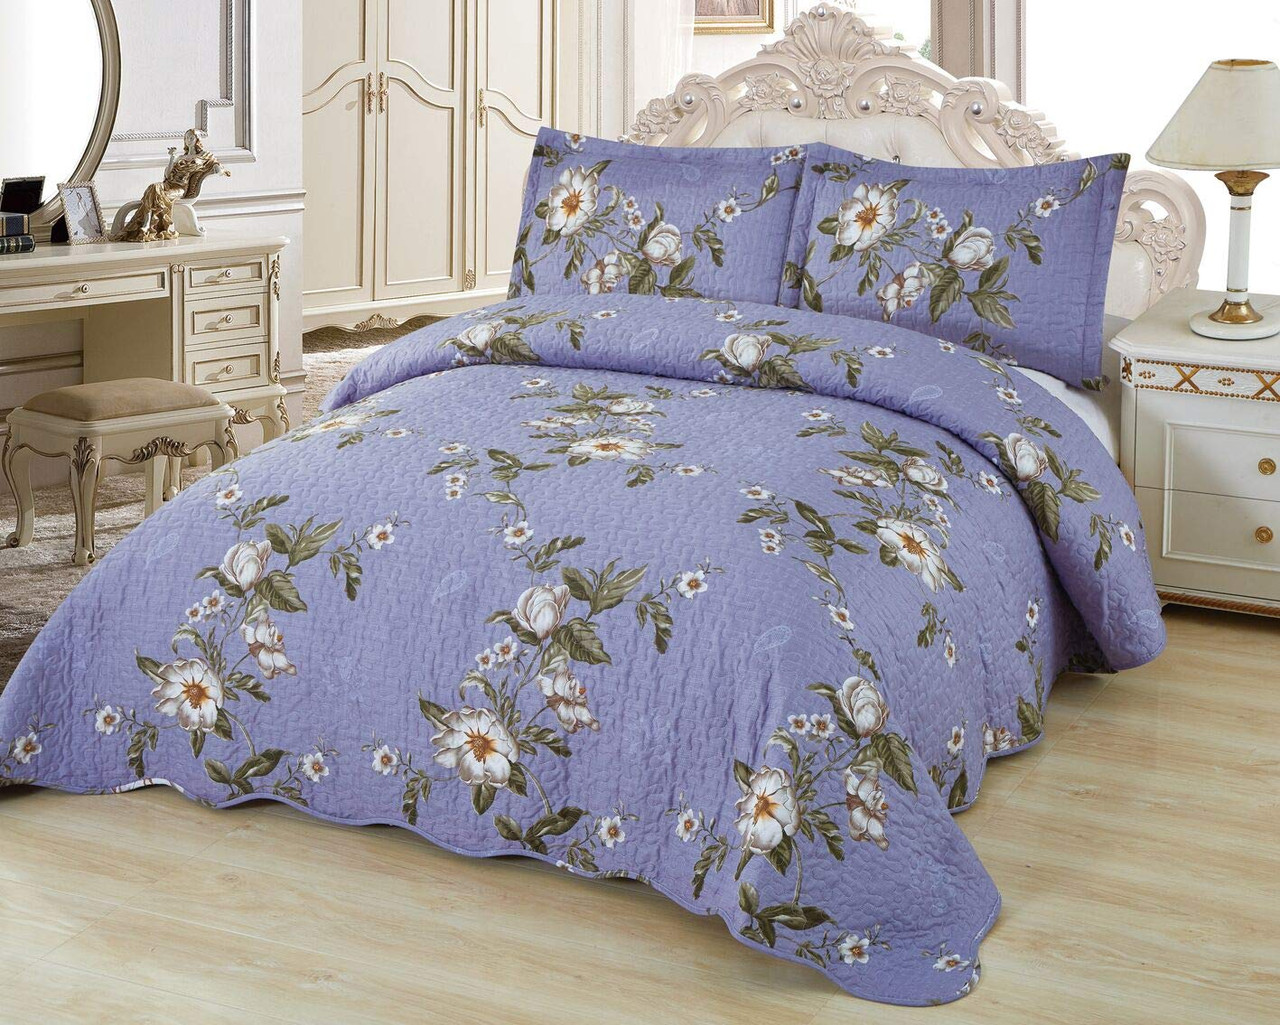 Orly S Dream 3 Pcs Super Soft Queen Size Printed Pre Washed Quilt